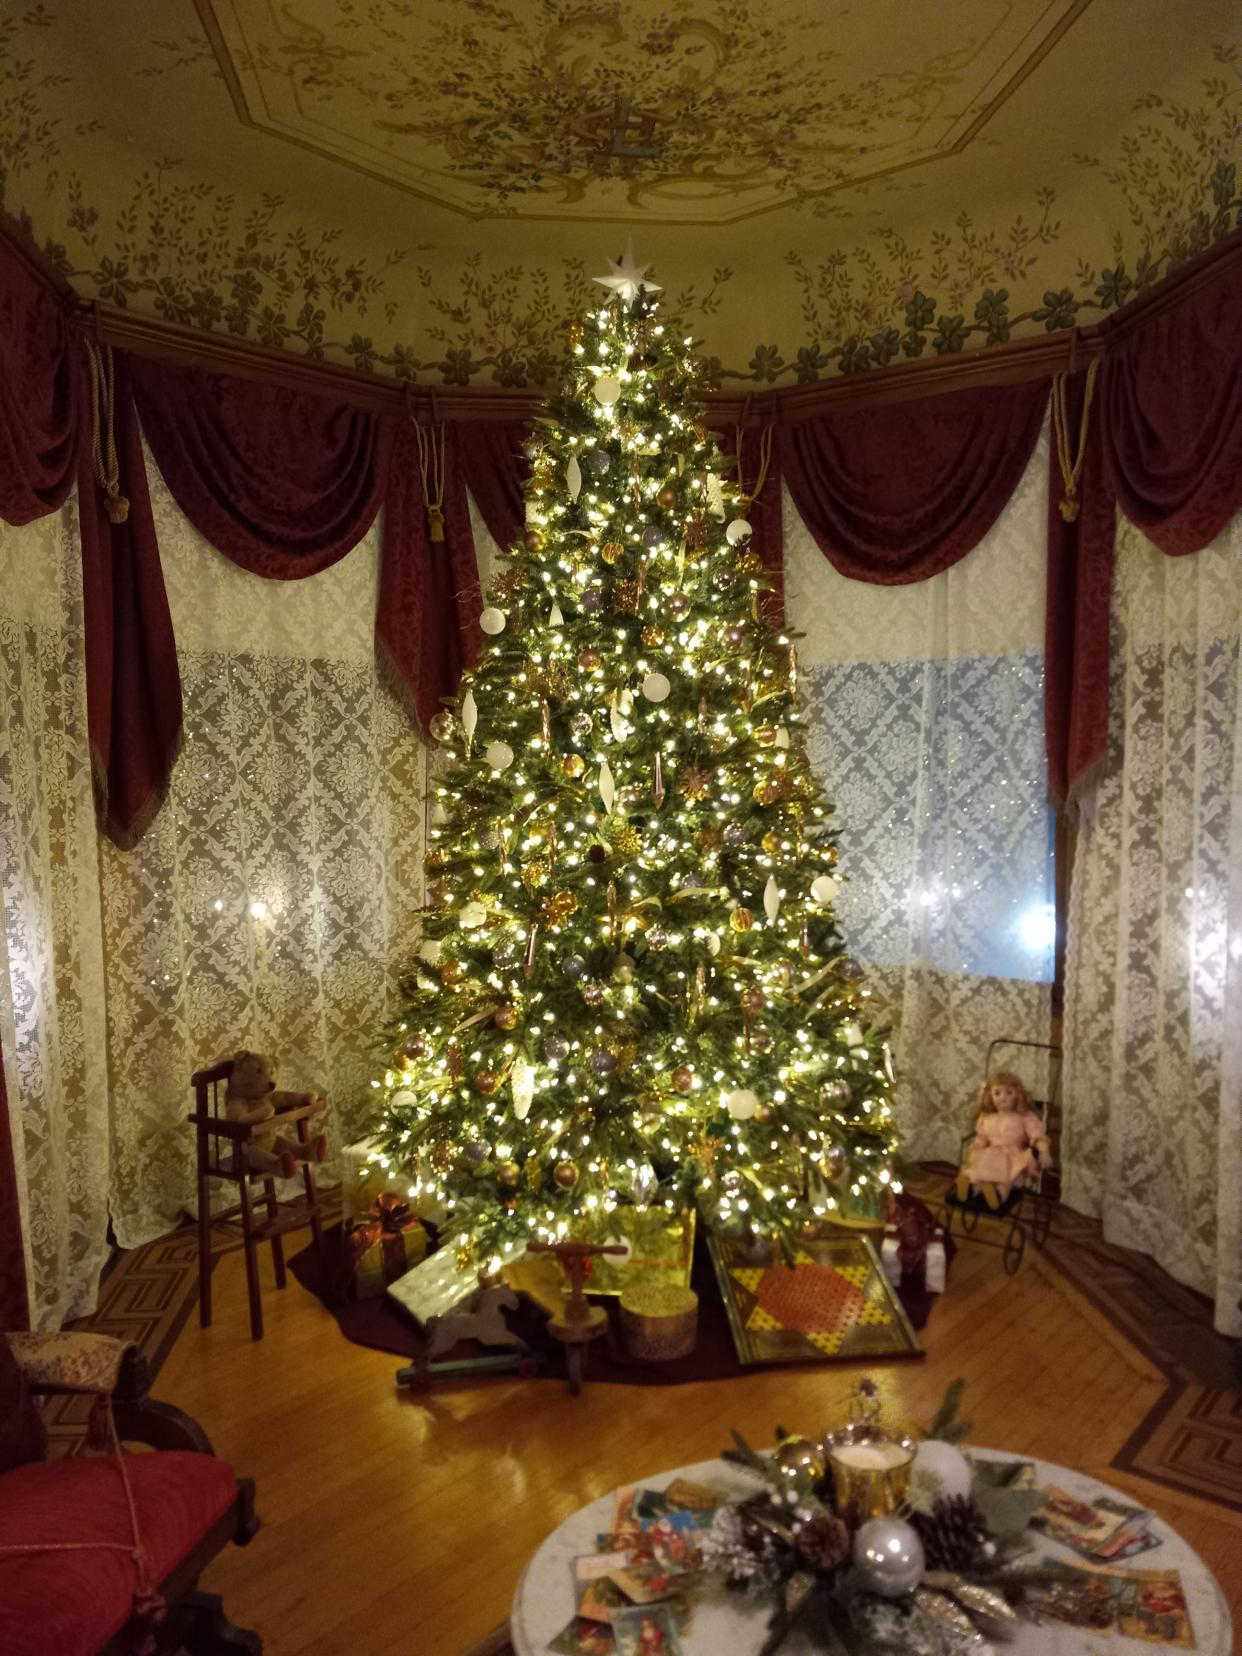 The Victorian House Museum extended its holiday hours 1-4 p.m. Monday-Thursday and 1-8 p.m. Friday and Saturday, Jan. 2-8.